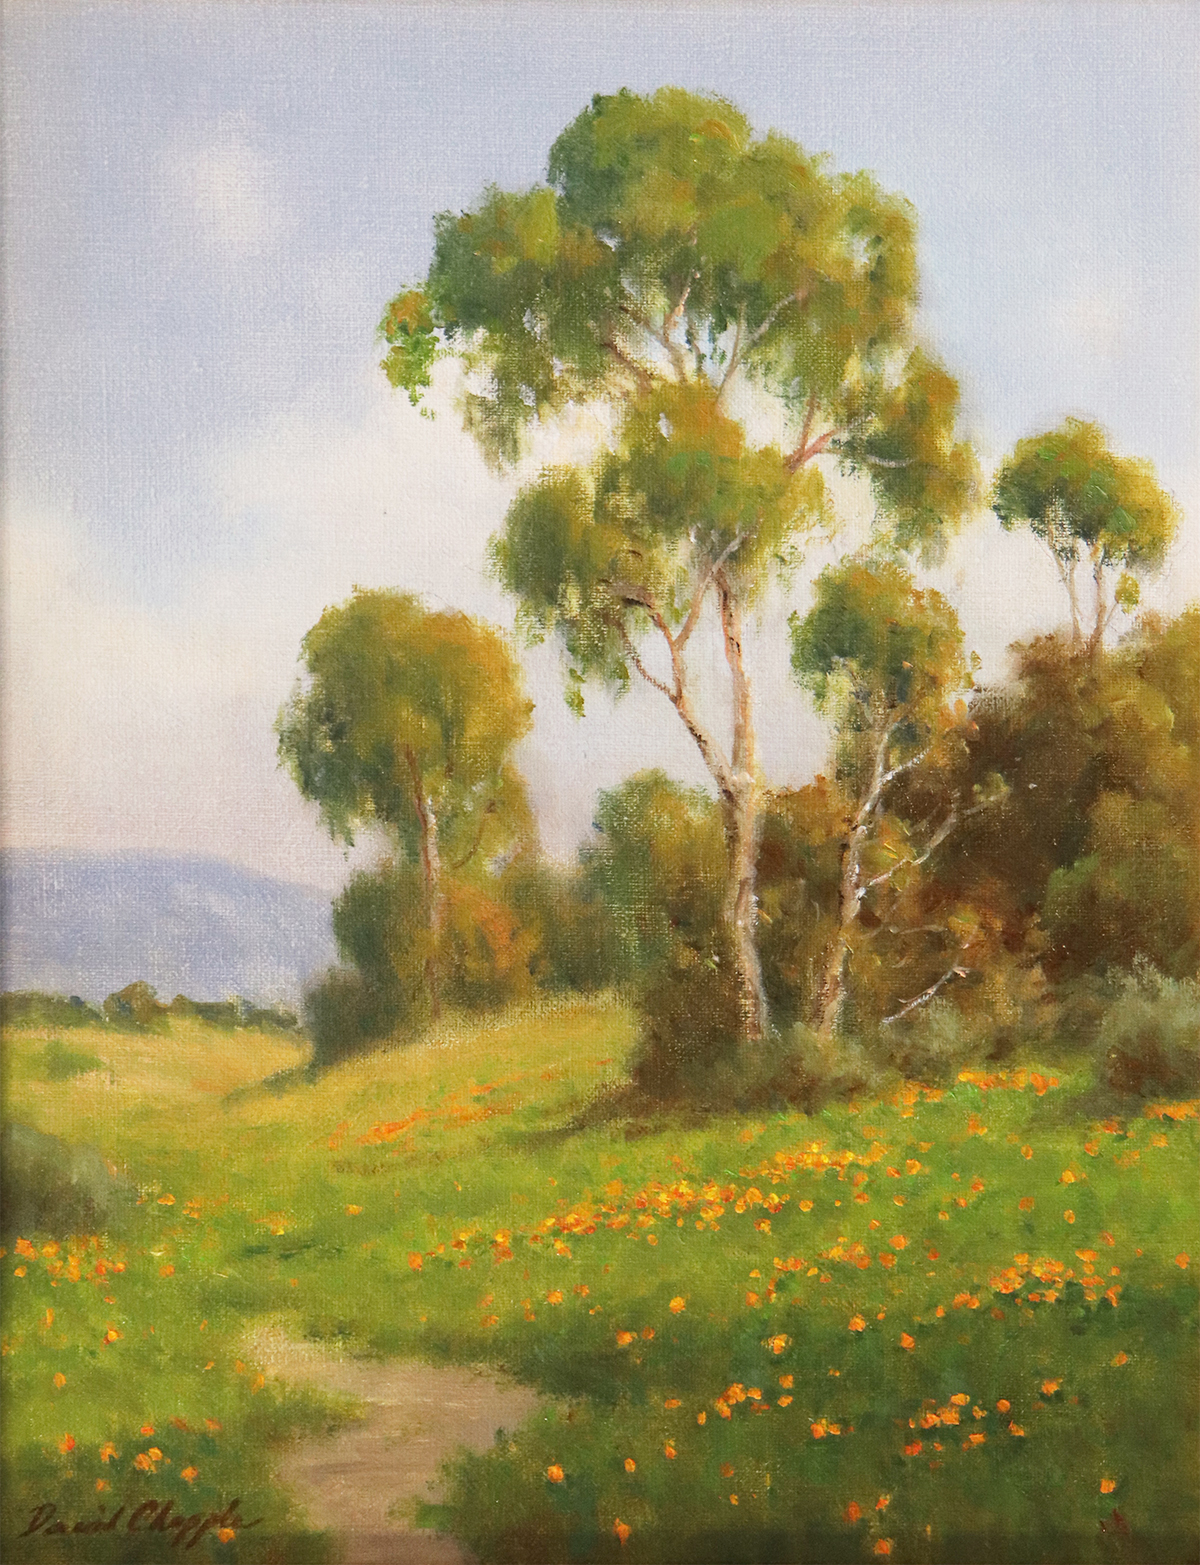 DAVE CHAPPLE - SPRING DAY - OIL ON BOARD - 11 X 14